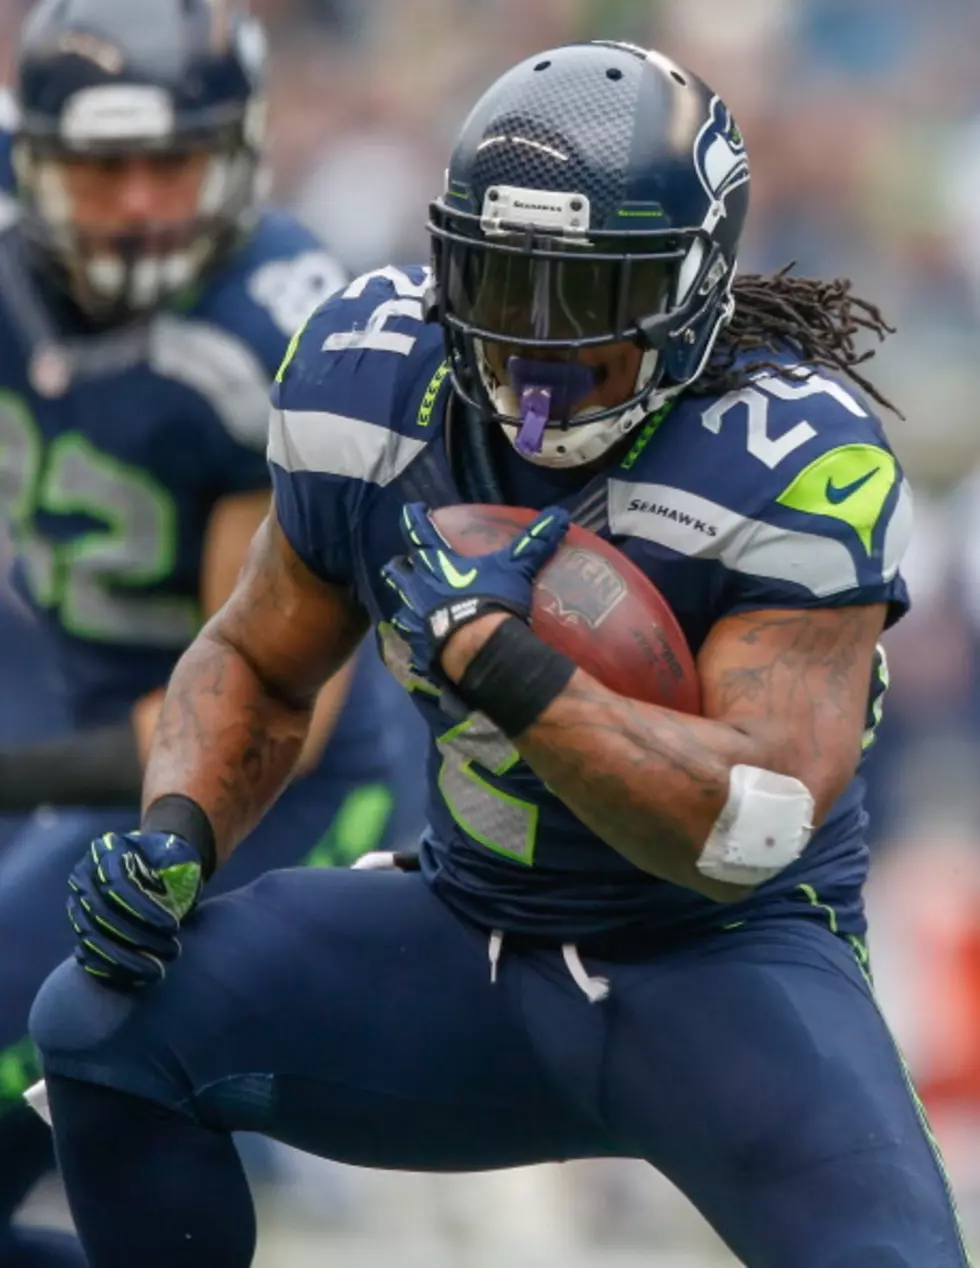 “Beast Mode” Skittles Seems To Be An Aquired Taste [VIDEO]